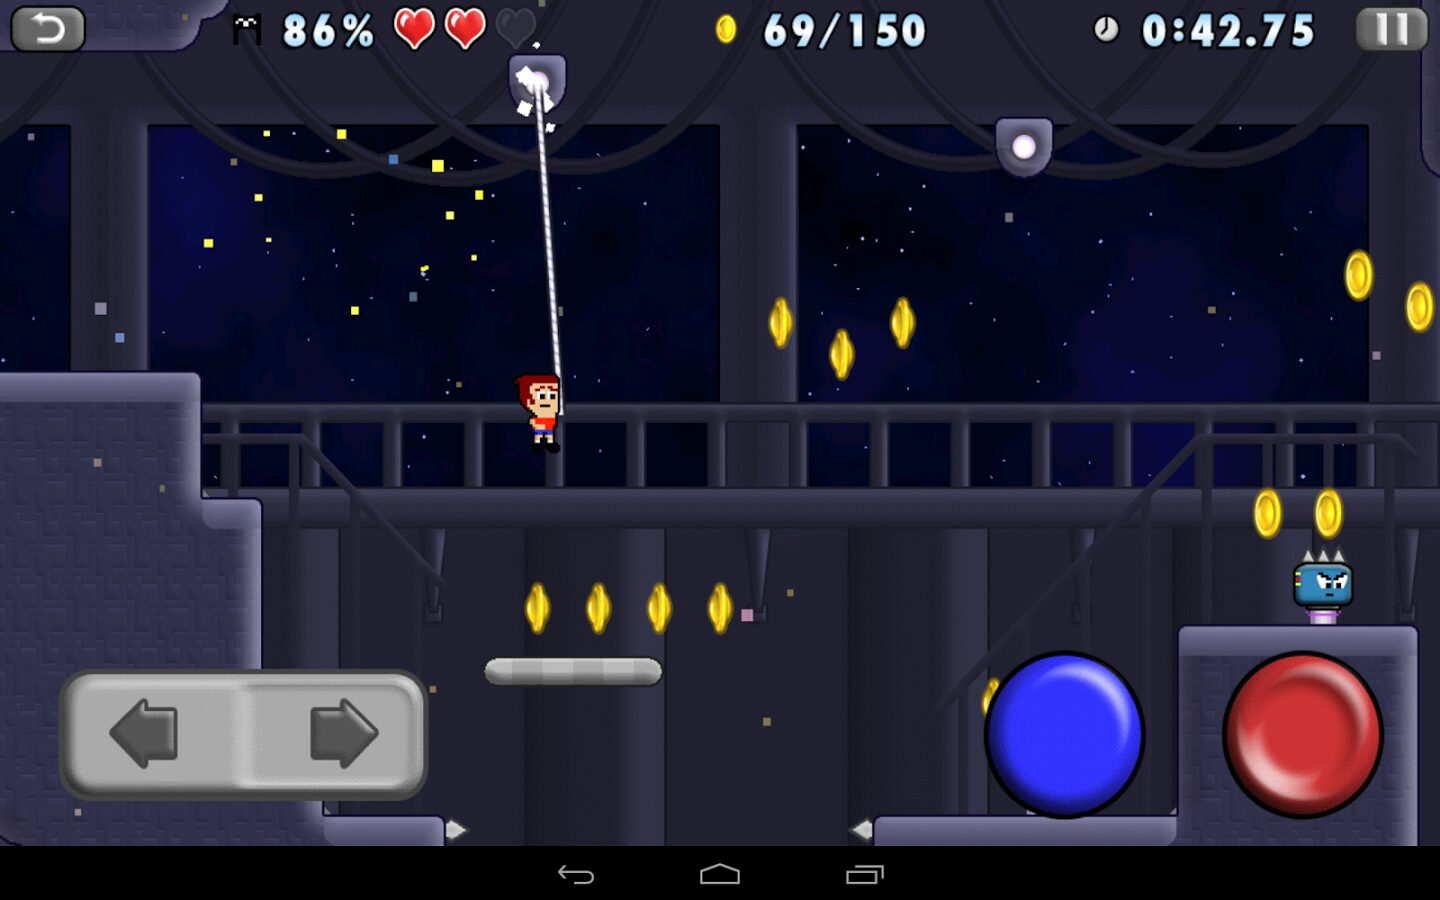 Derniers Jeux Android : Mikey Hooks, Family Guy, Cards and Castles, … Jeux Android